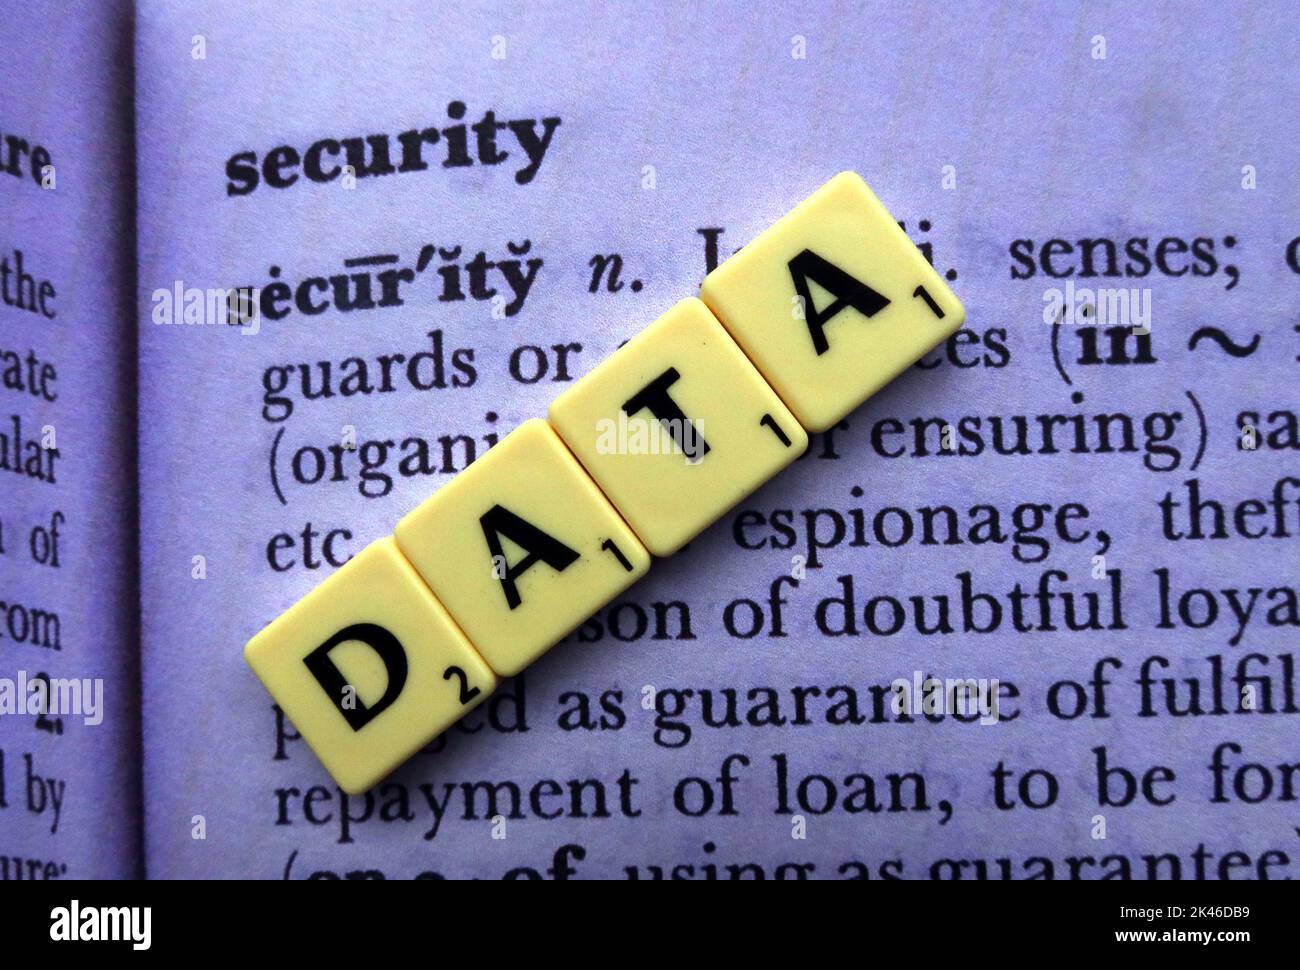 Data security,spelled out in Scrabble letters, on the dictionary definition of security Stock Photo